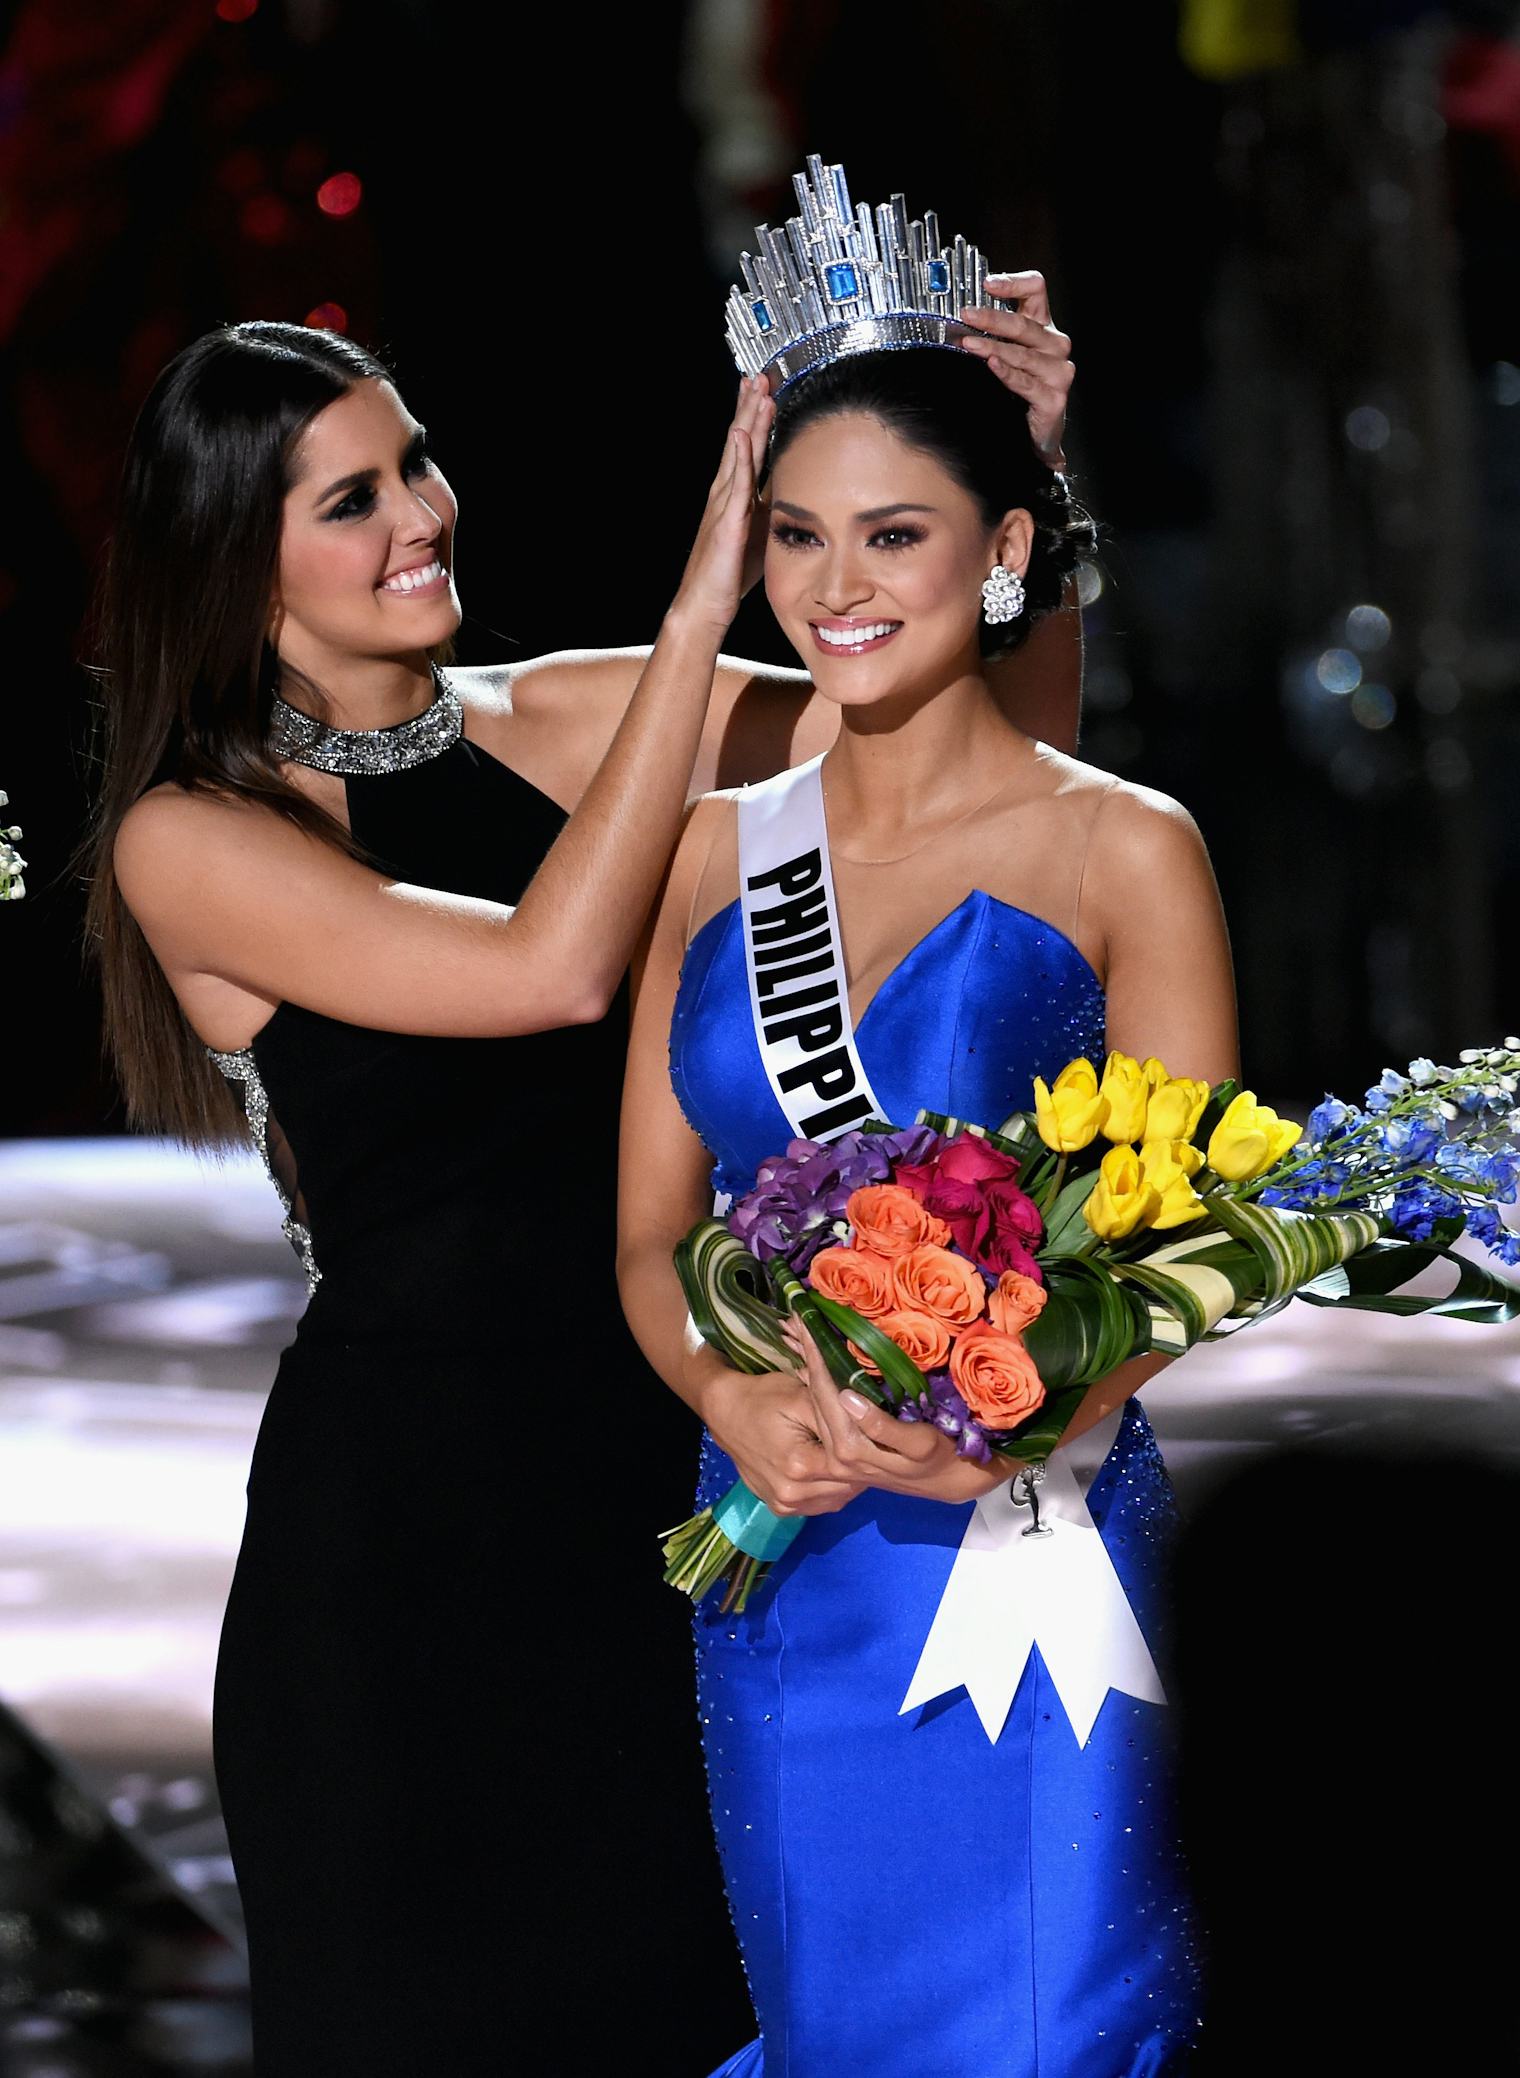 imaginative essay on if i were crowned miss universe